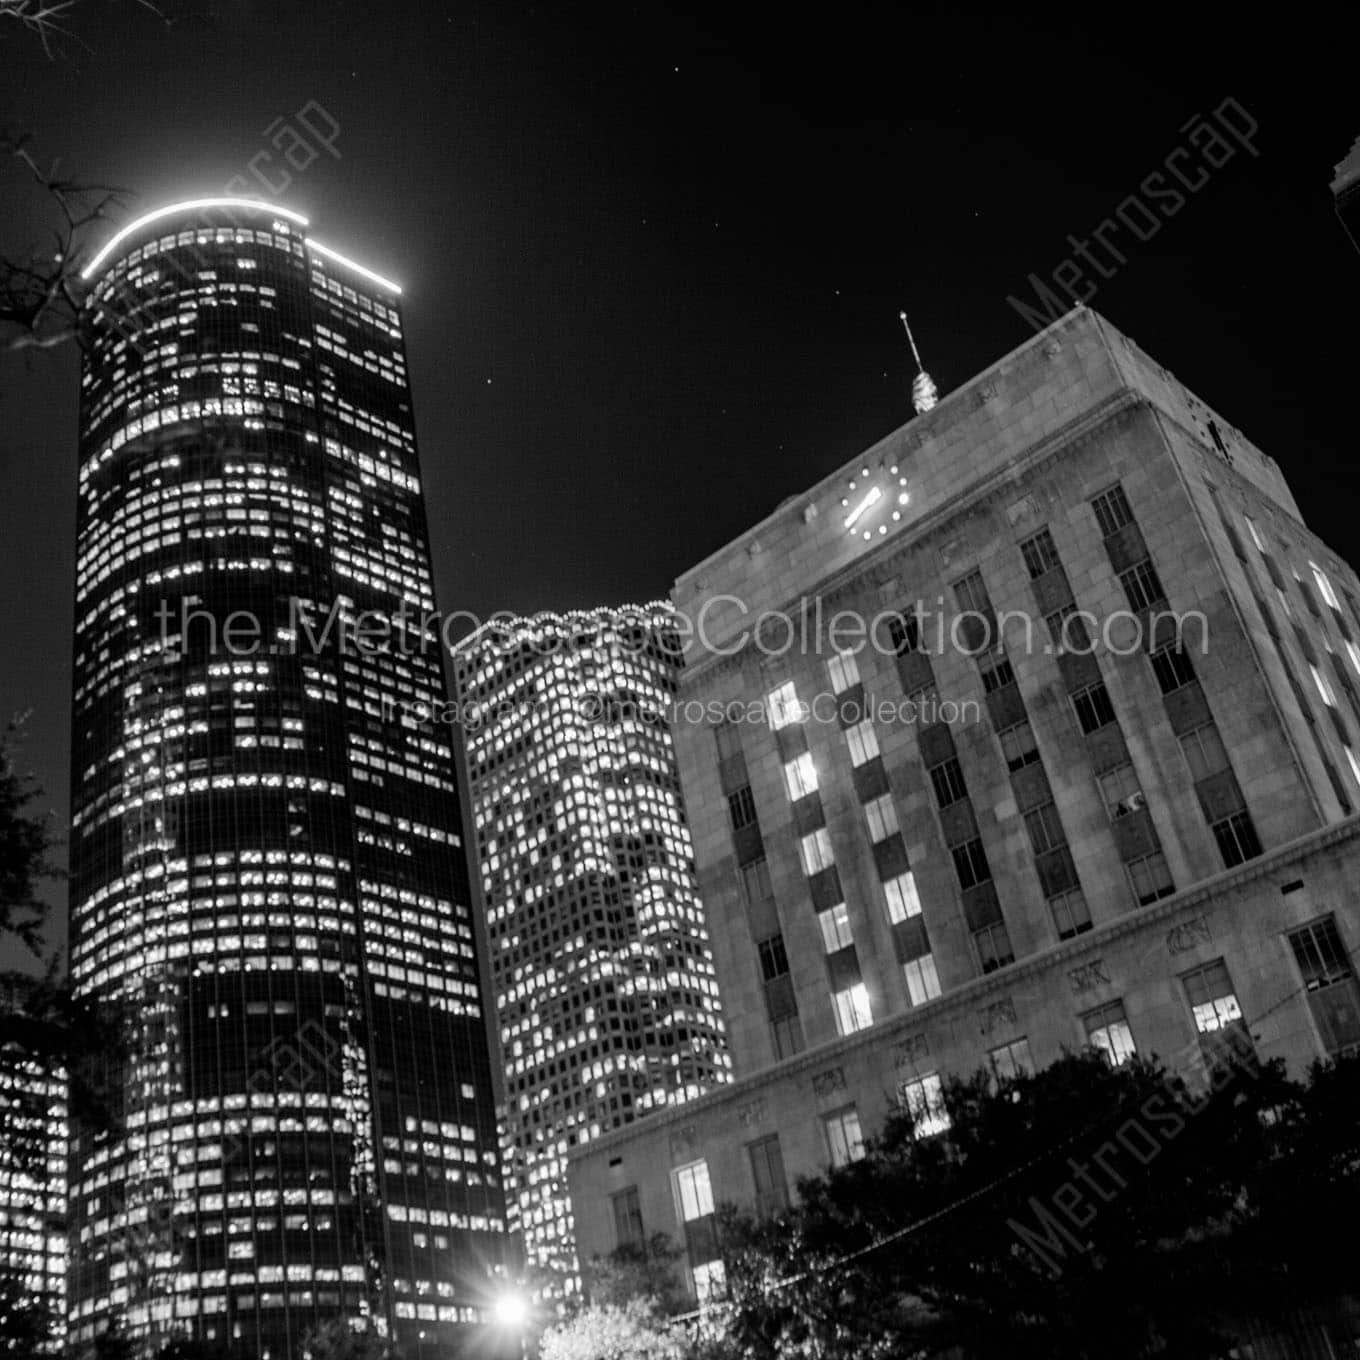 shell building and houston city hall at night Black & White Office Art